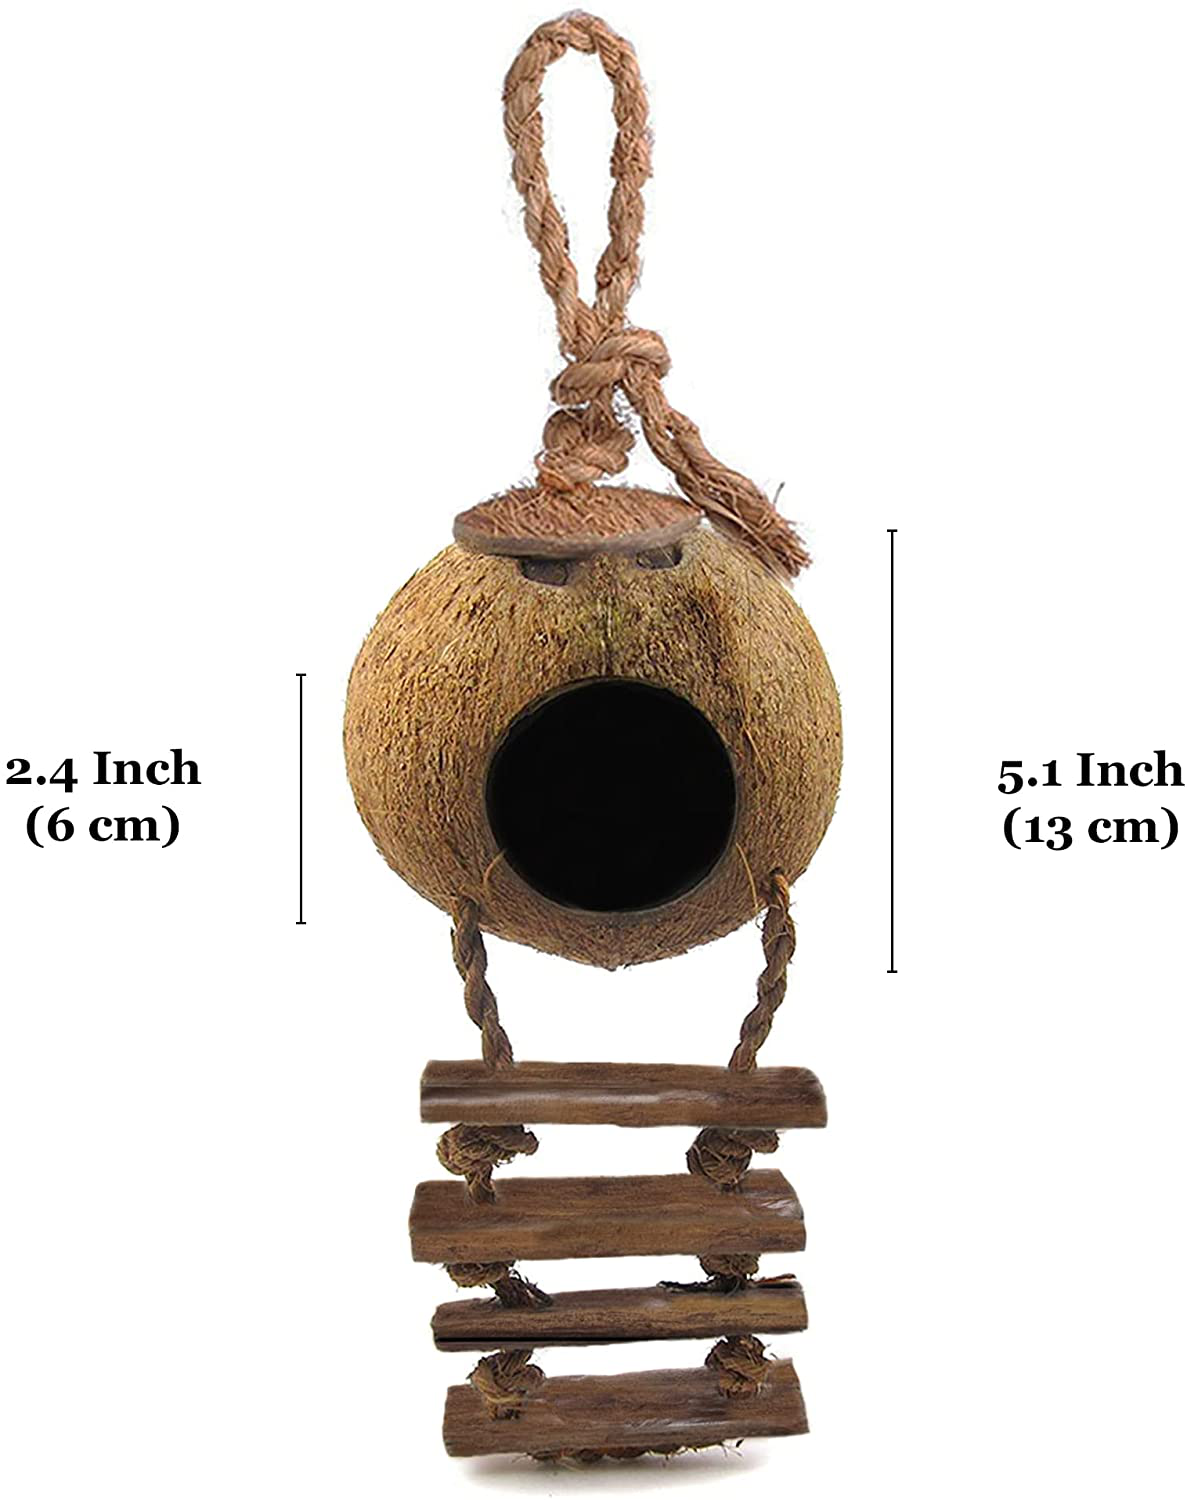 Sungrow Crested Gecko Coco Den with Ladder, 5” Diameter, 2.5” Cave Opening, Raw Coconut Husk Habitat with Hanging Loop, 1 Pc per Pack